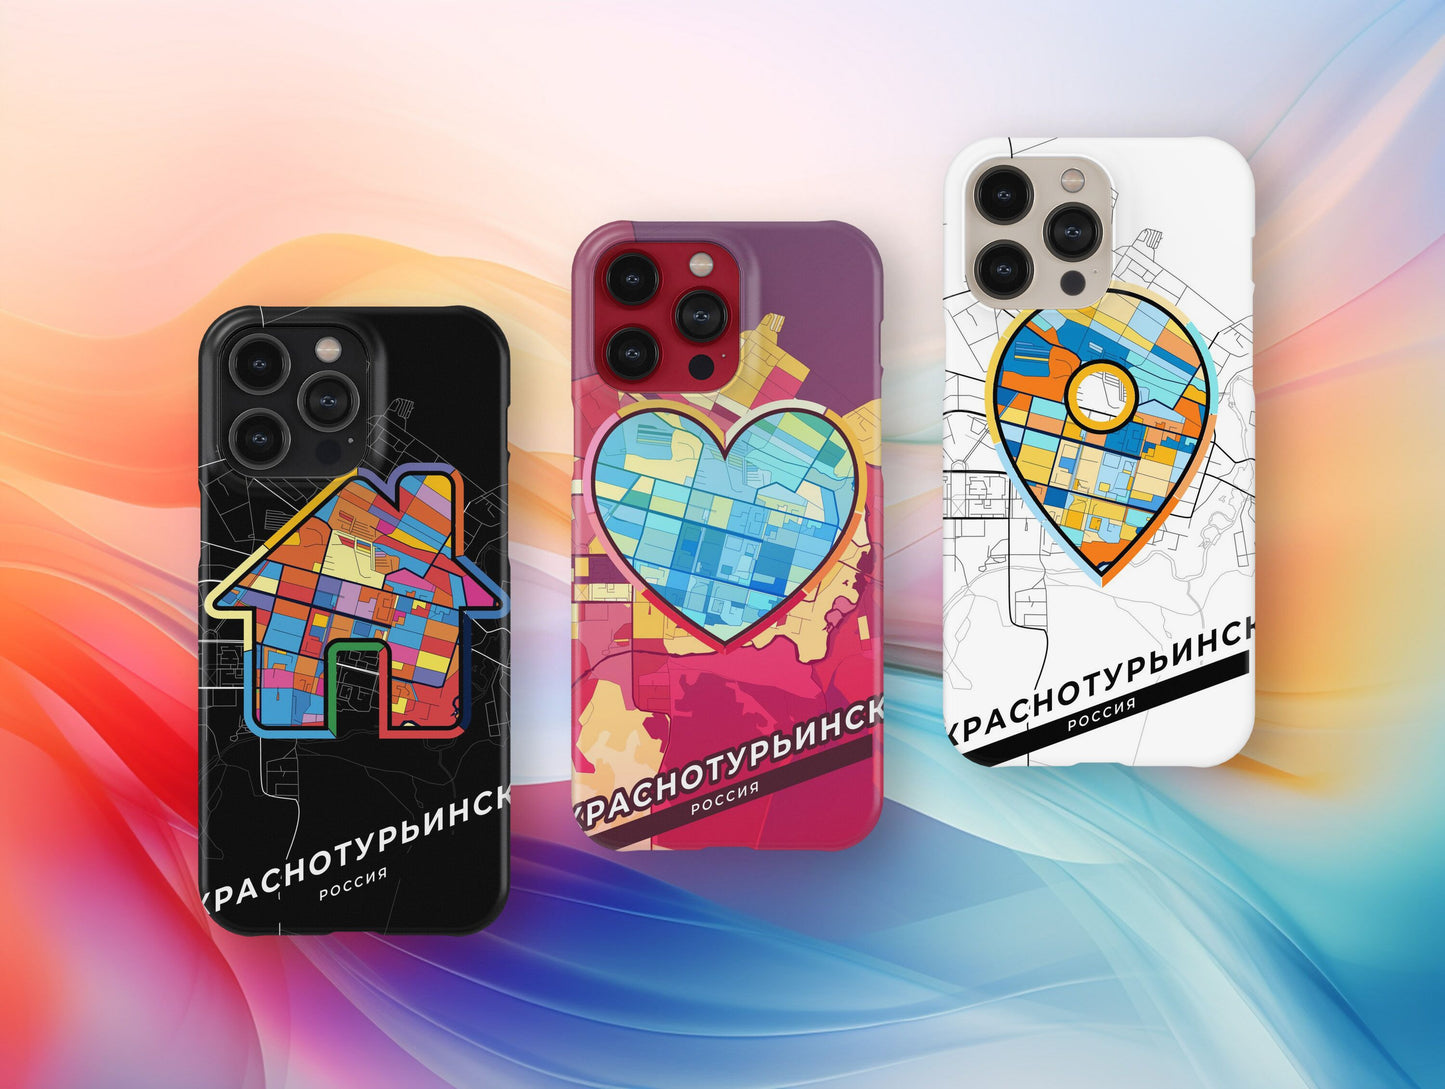 Krasnoturyinsk Russia slim phone case with colorful icon. Birthday, wedding or housewarming gift. Couple match cases.